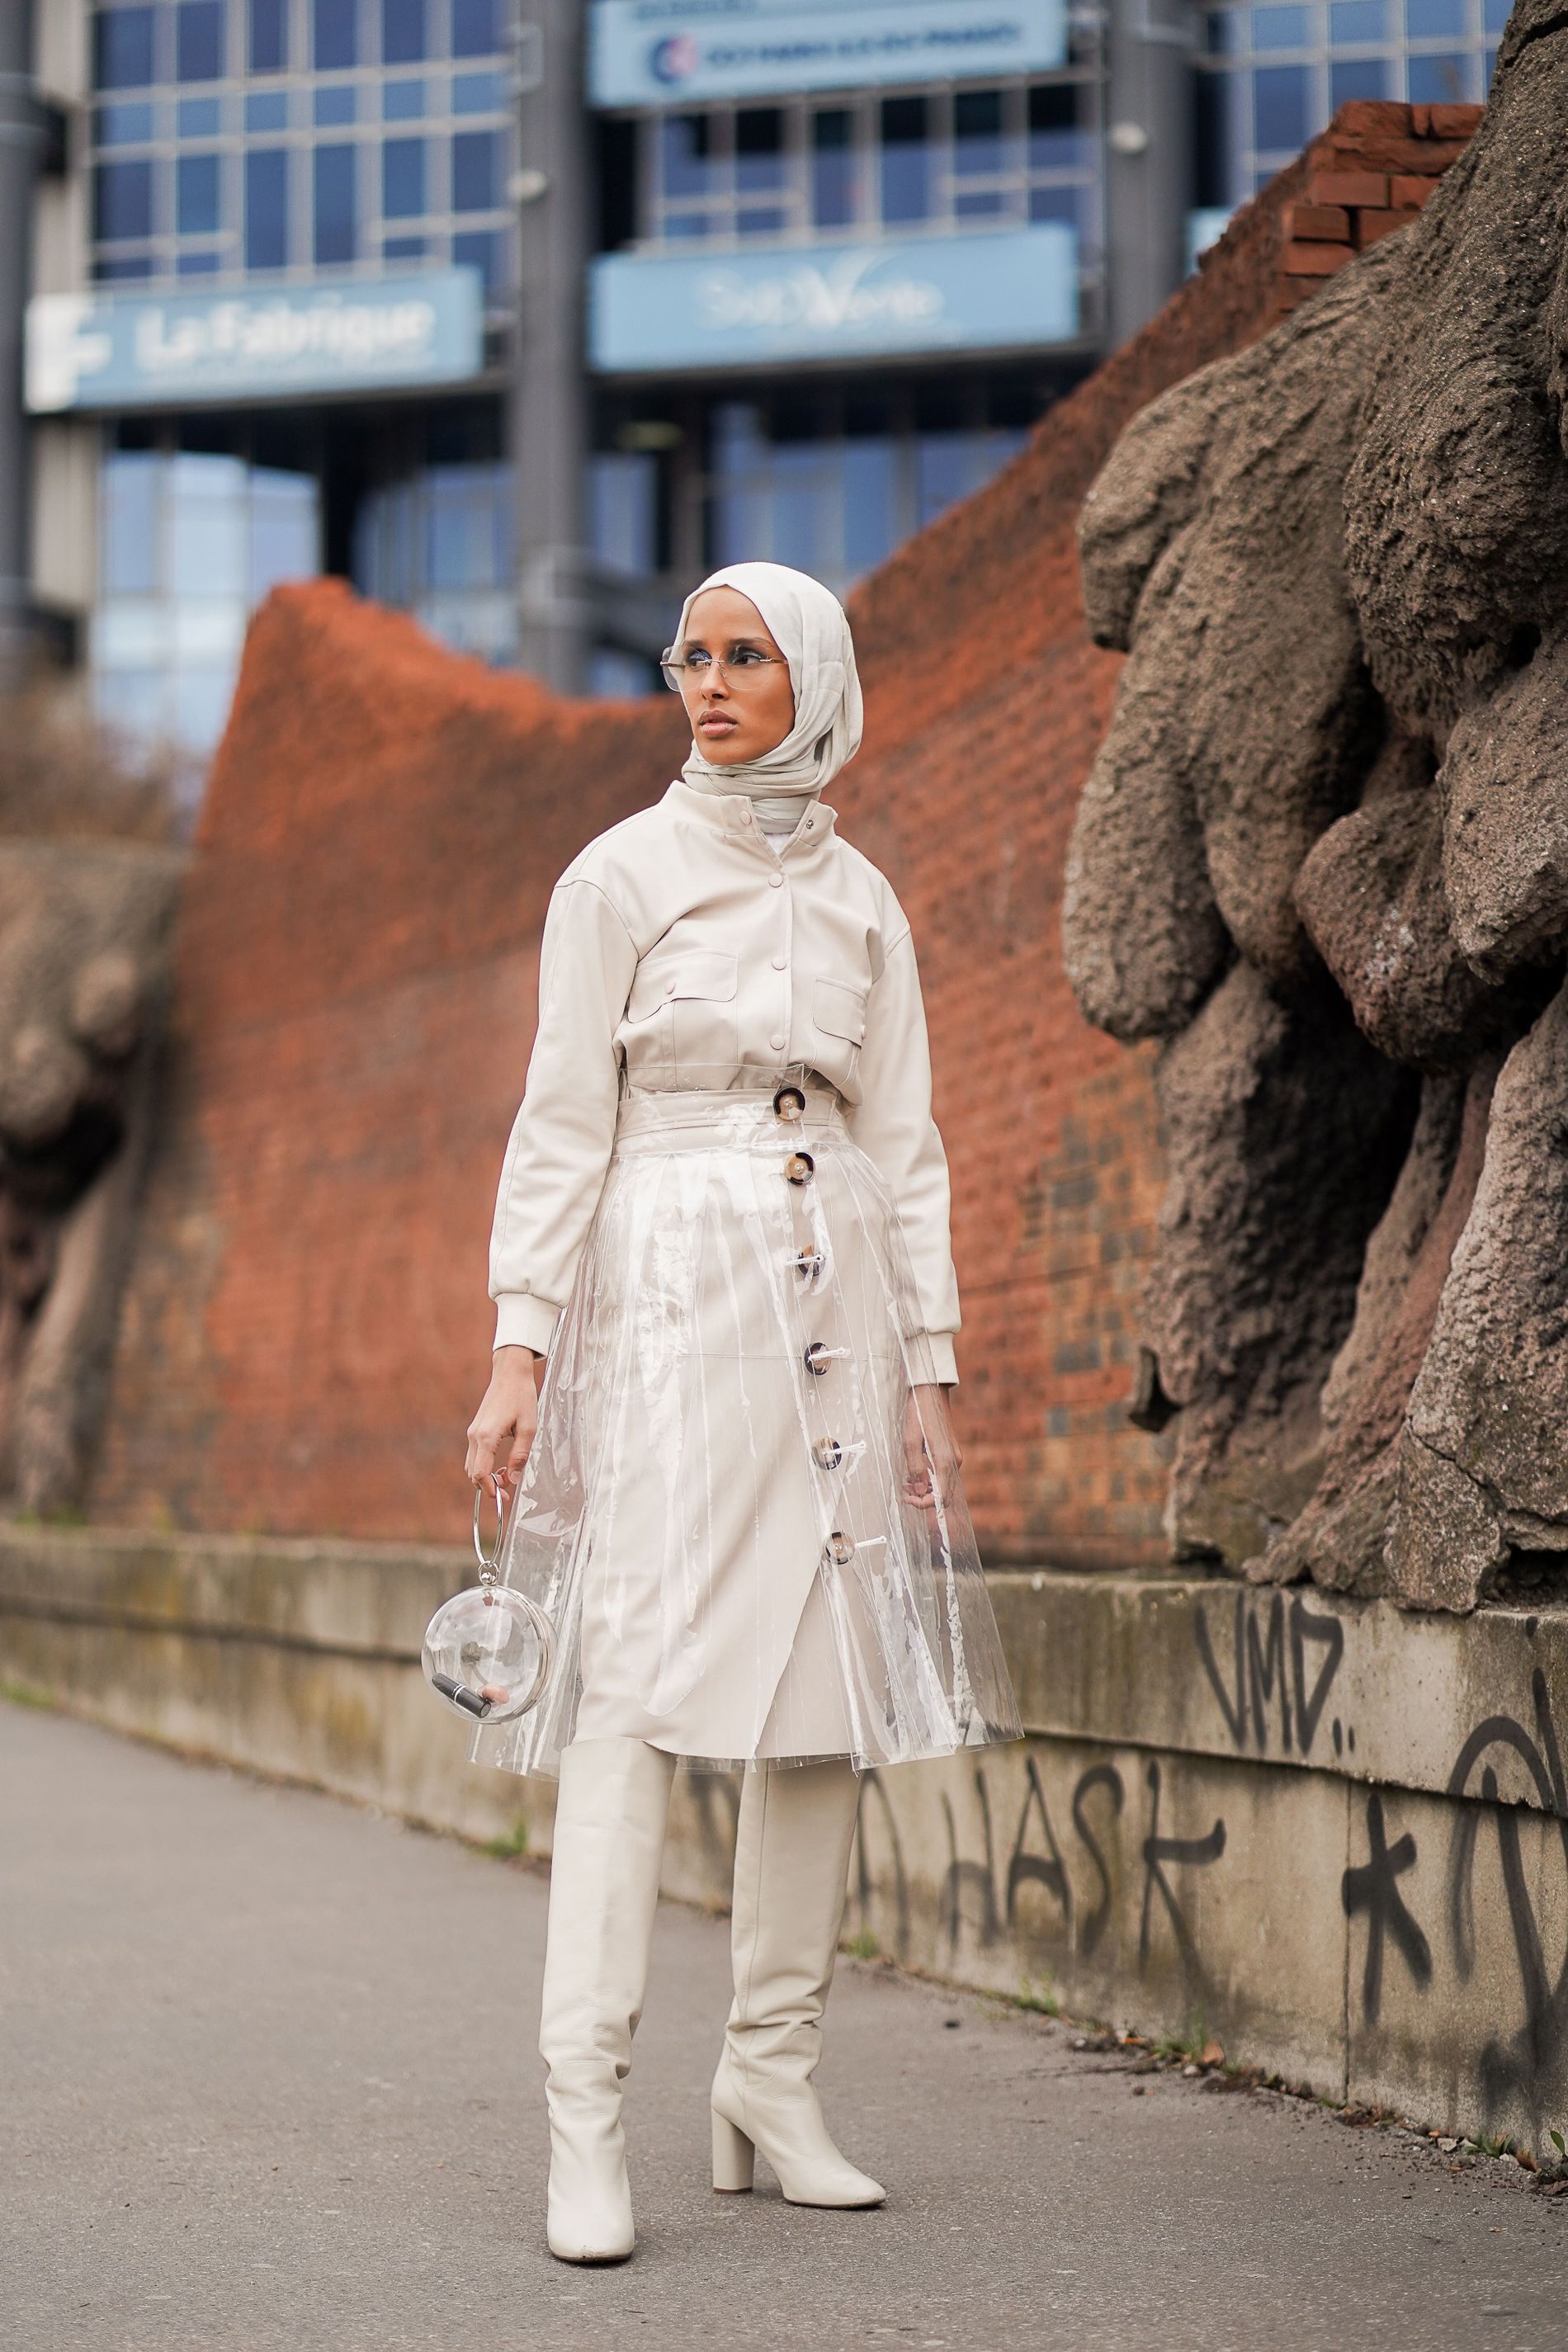 Rawdah Mohamed wearing White outfit